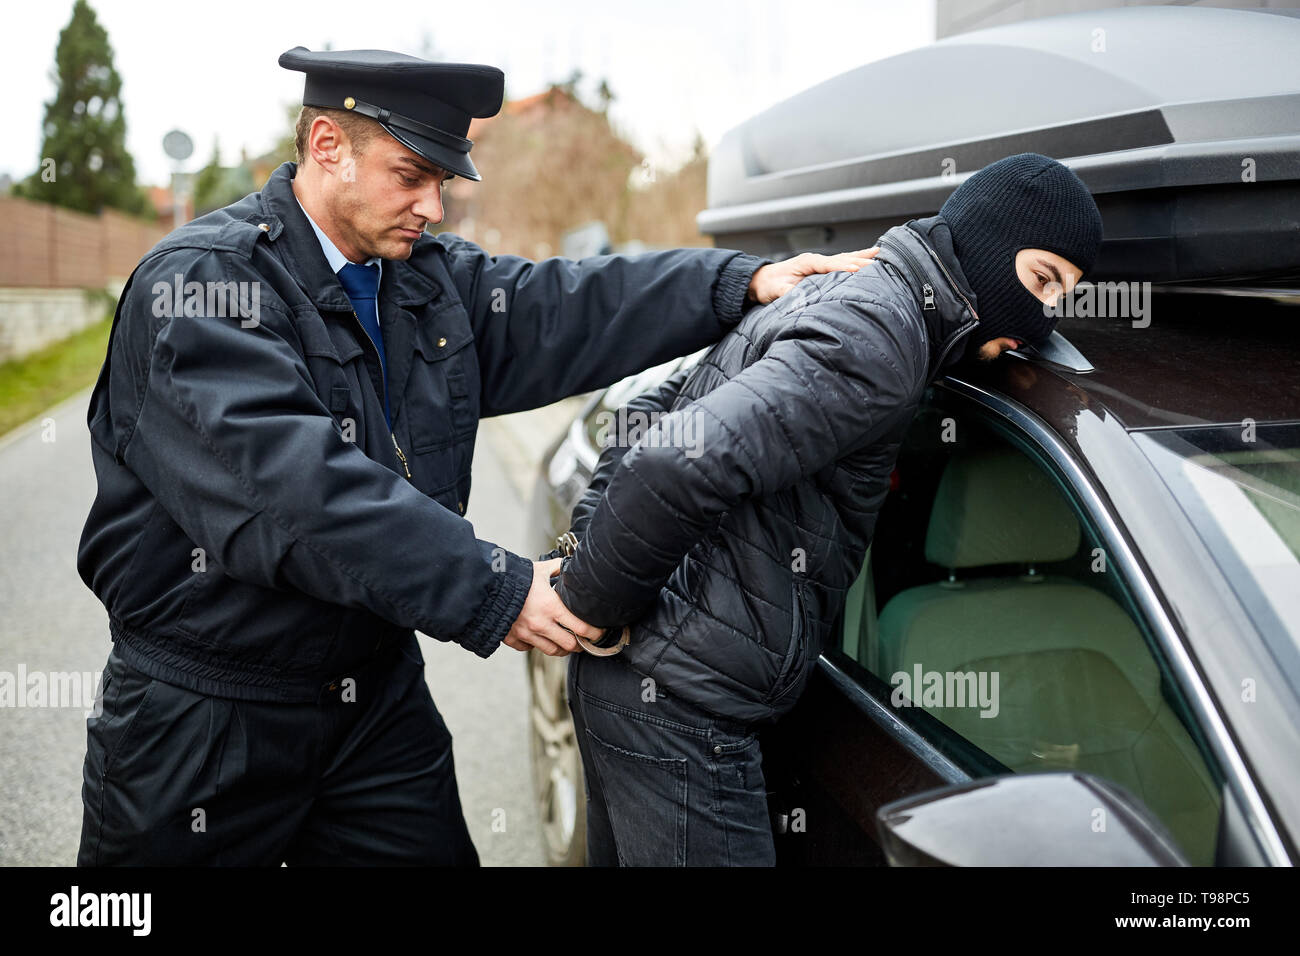 Police officer arrests car thief in the act and handcuffs him on arrest Stock Photo